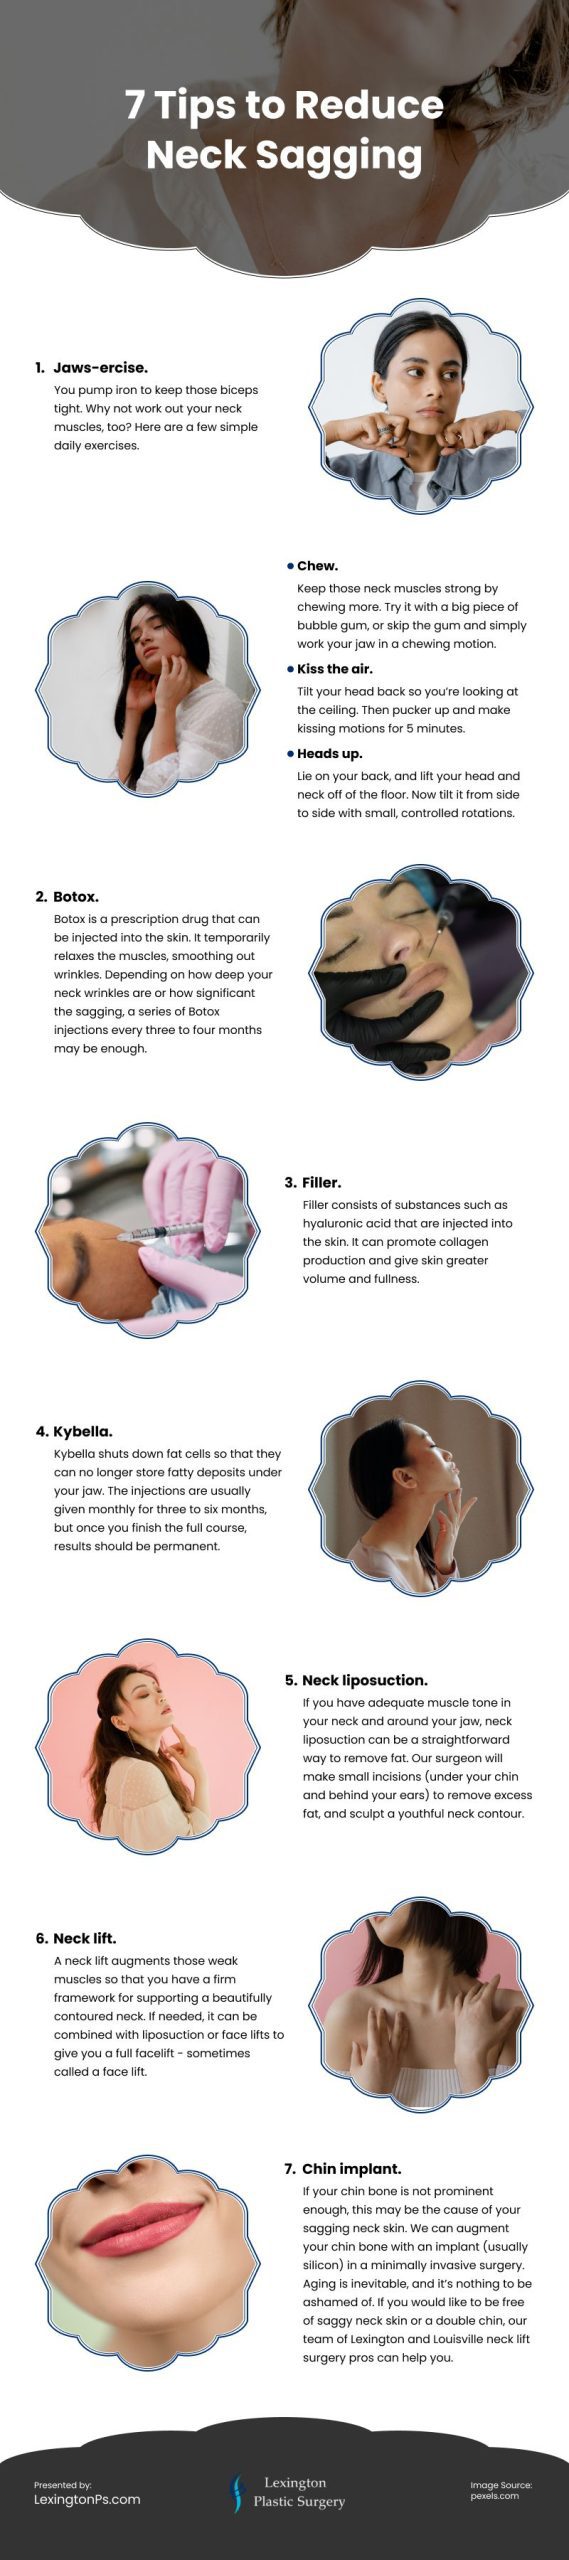 7 Tips to Reduce Neck Sagging Infographic